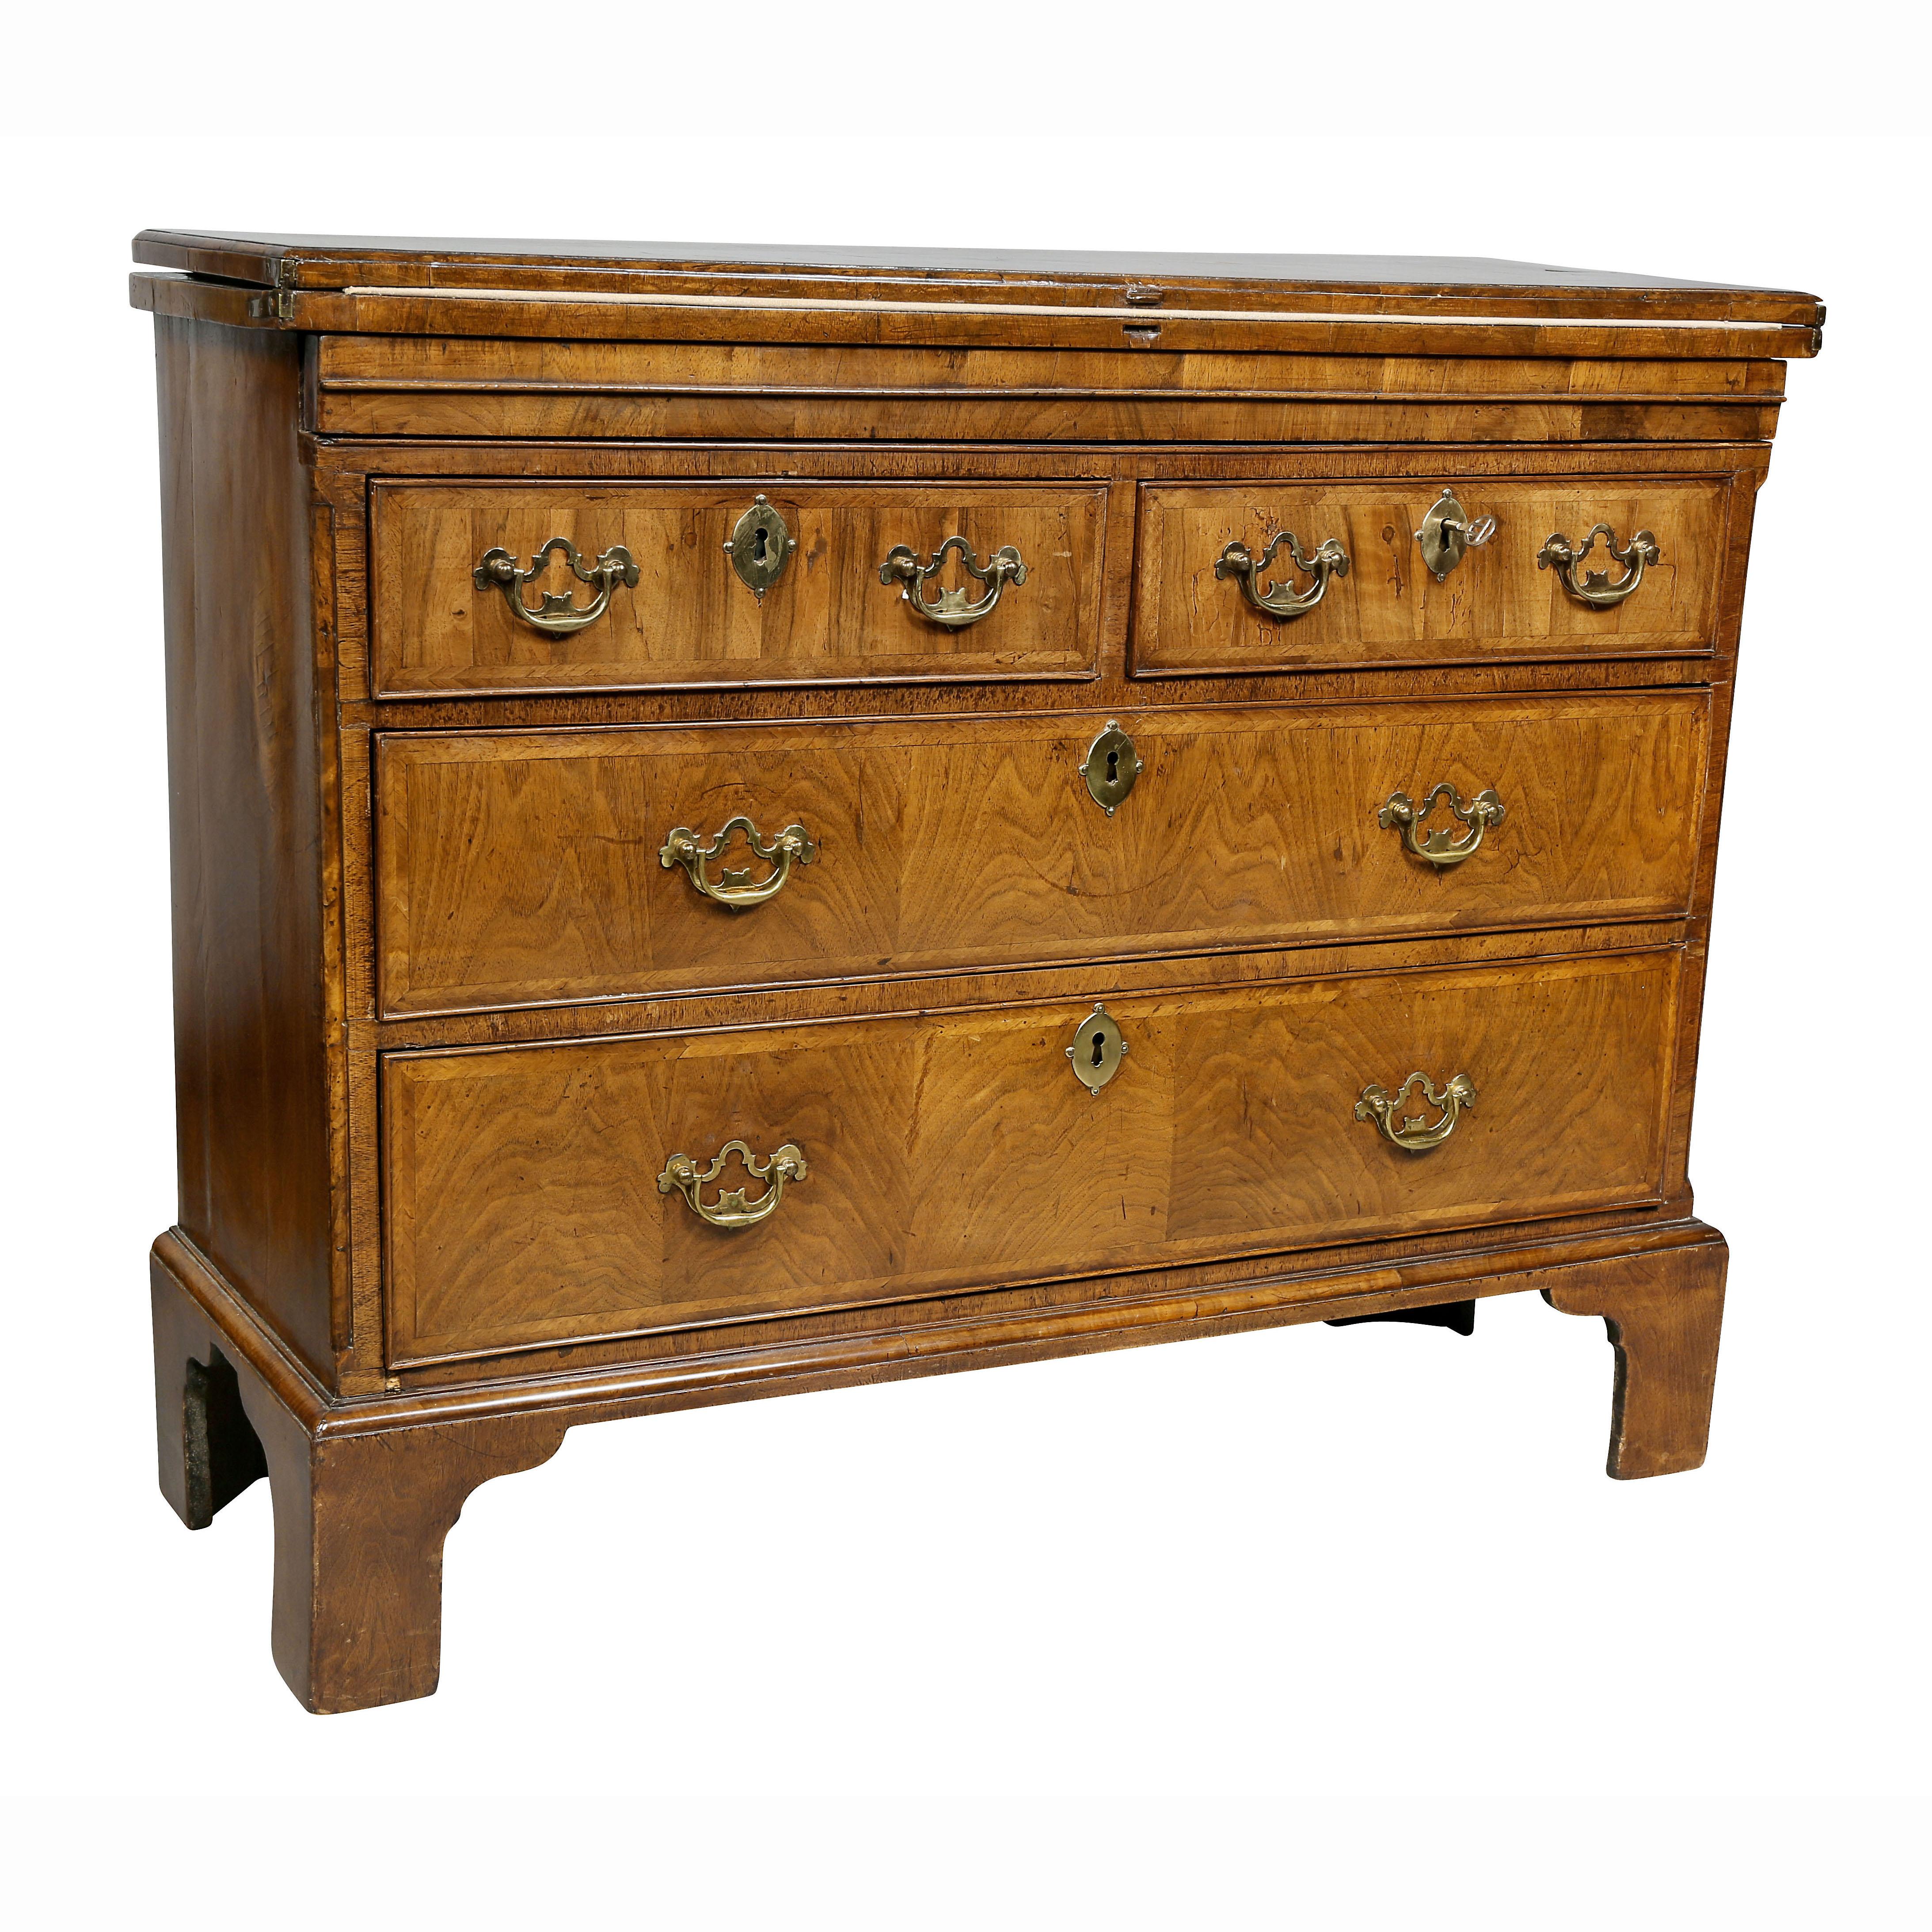 With rectangular hinged top with crossbanded edge, fabric lined interior over a hidden drawer that supports opened lid and two short drawers over two long drawers, raised on bracket feet.